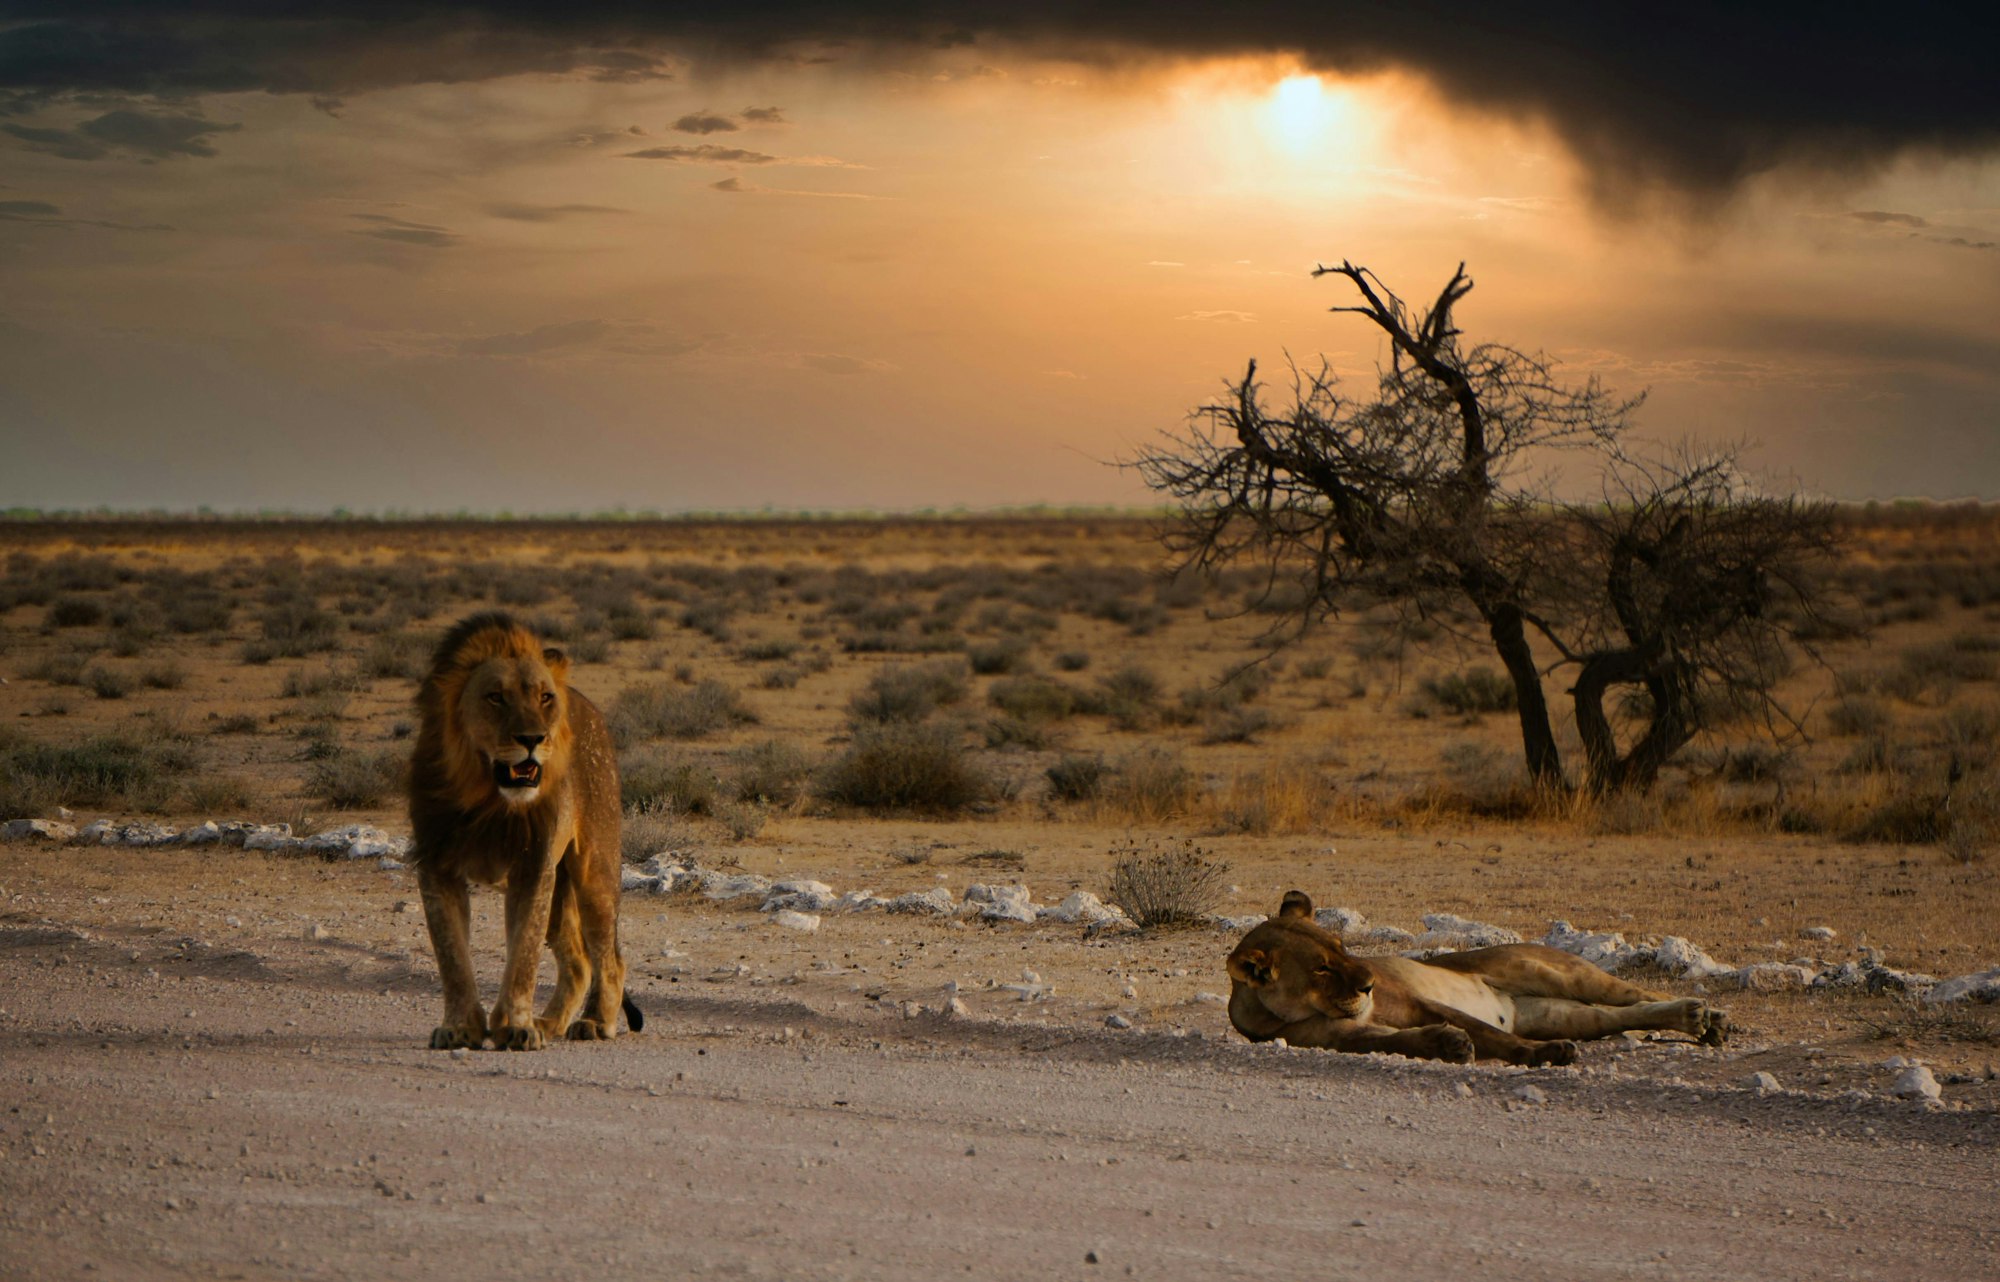 brown lion on gray sand during daytime In the Etosha National Park in Namibia. Photo by Sean Robertson / Unsplash